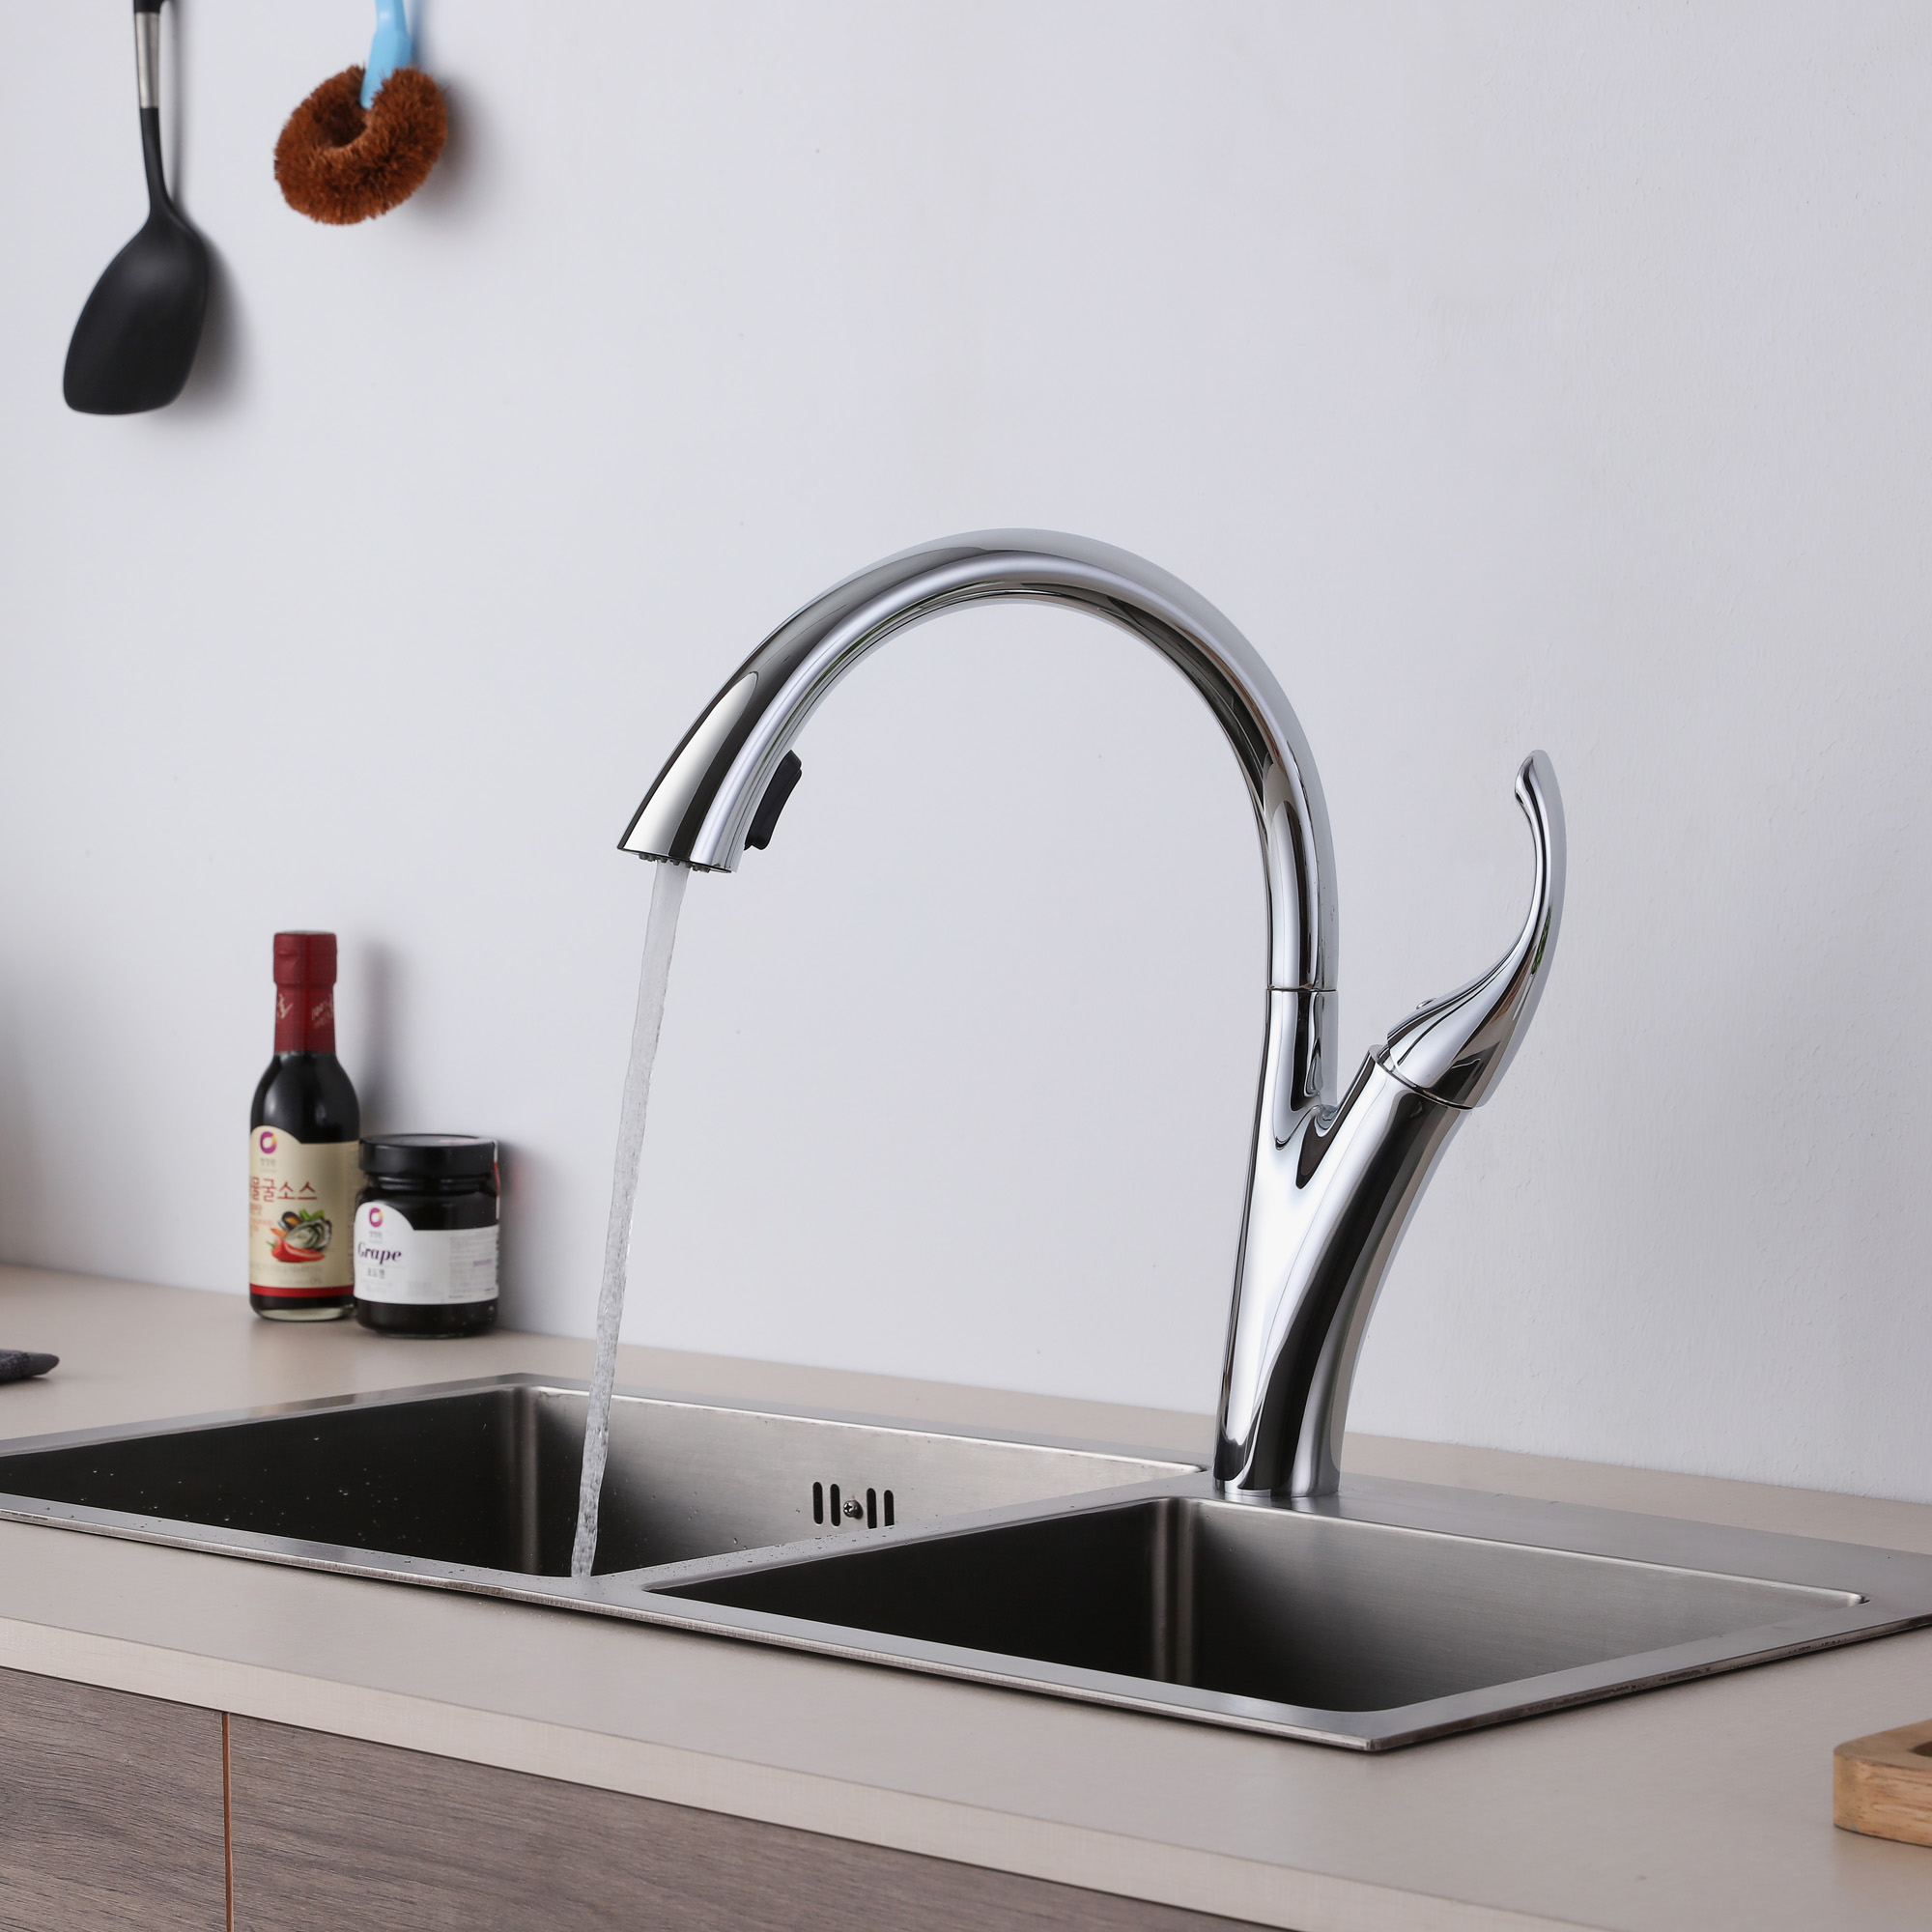 Multifunctional Chrome Surface Tap For Cabinet Faucet Single Kitchen Mixer With High Quality